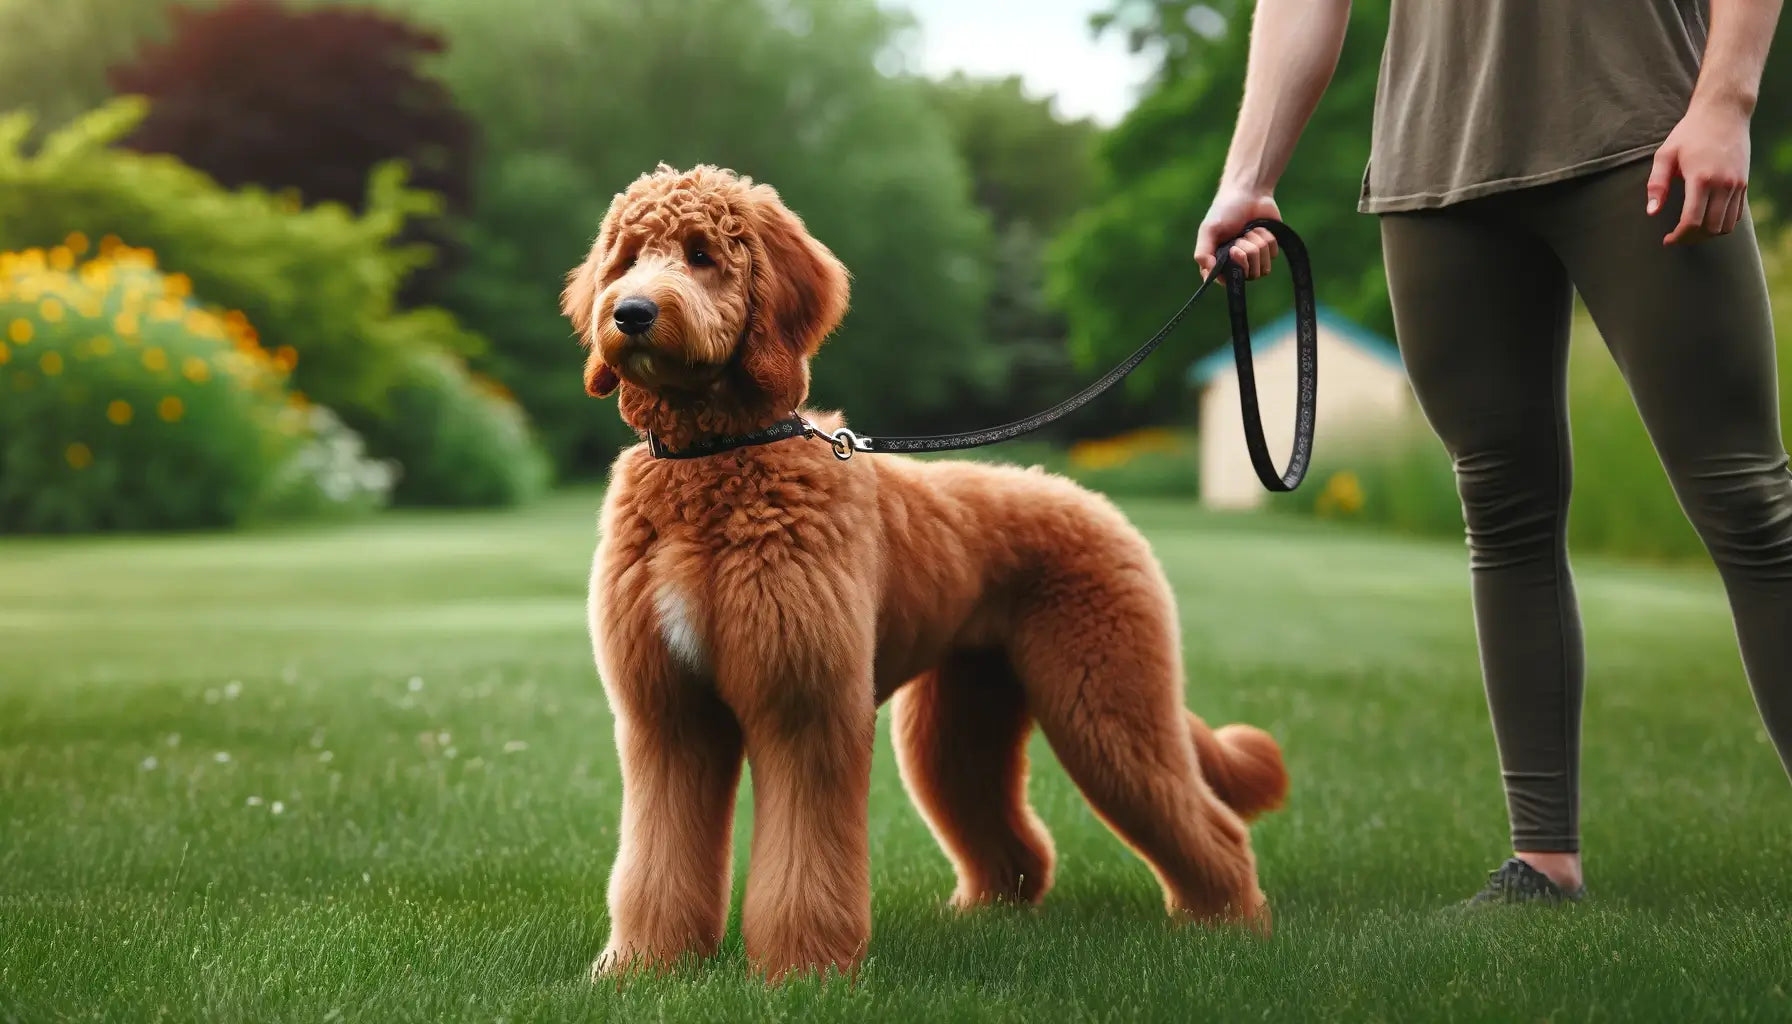 A Red Goldendoodle on a leash, standing confidently on grass, displaying its robust physique and readiness for outdoor activities.